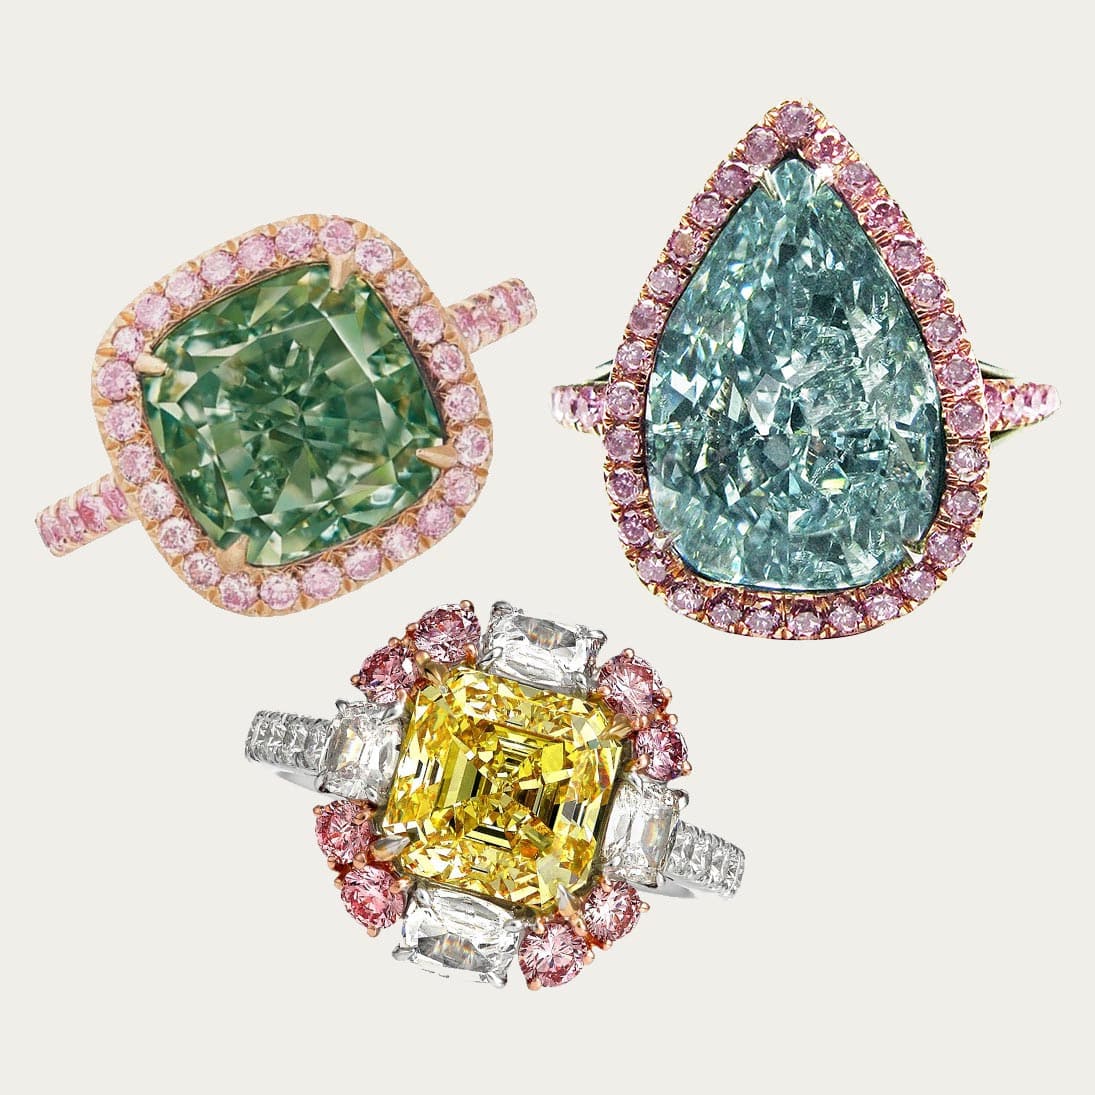 Our Guide to Fancy-Colored Diamond Engagement Rings